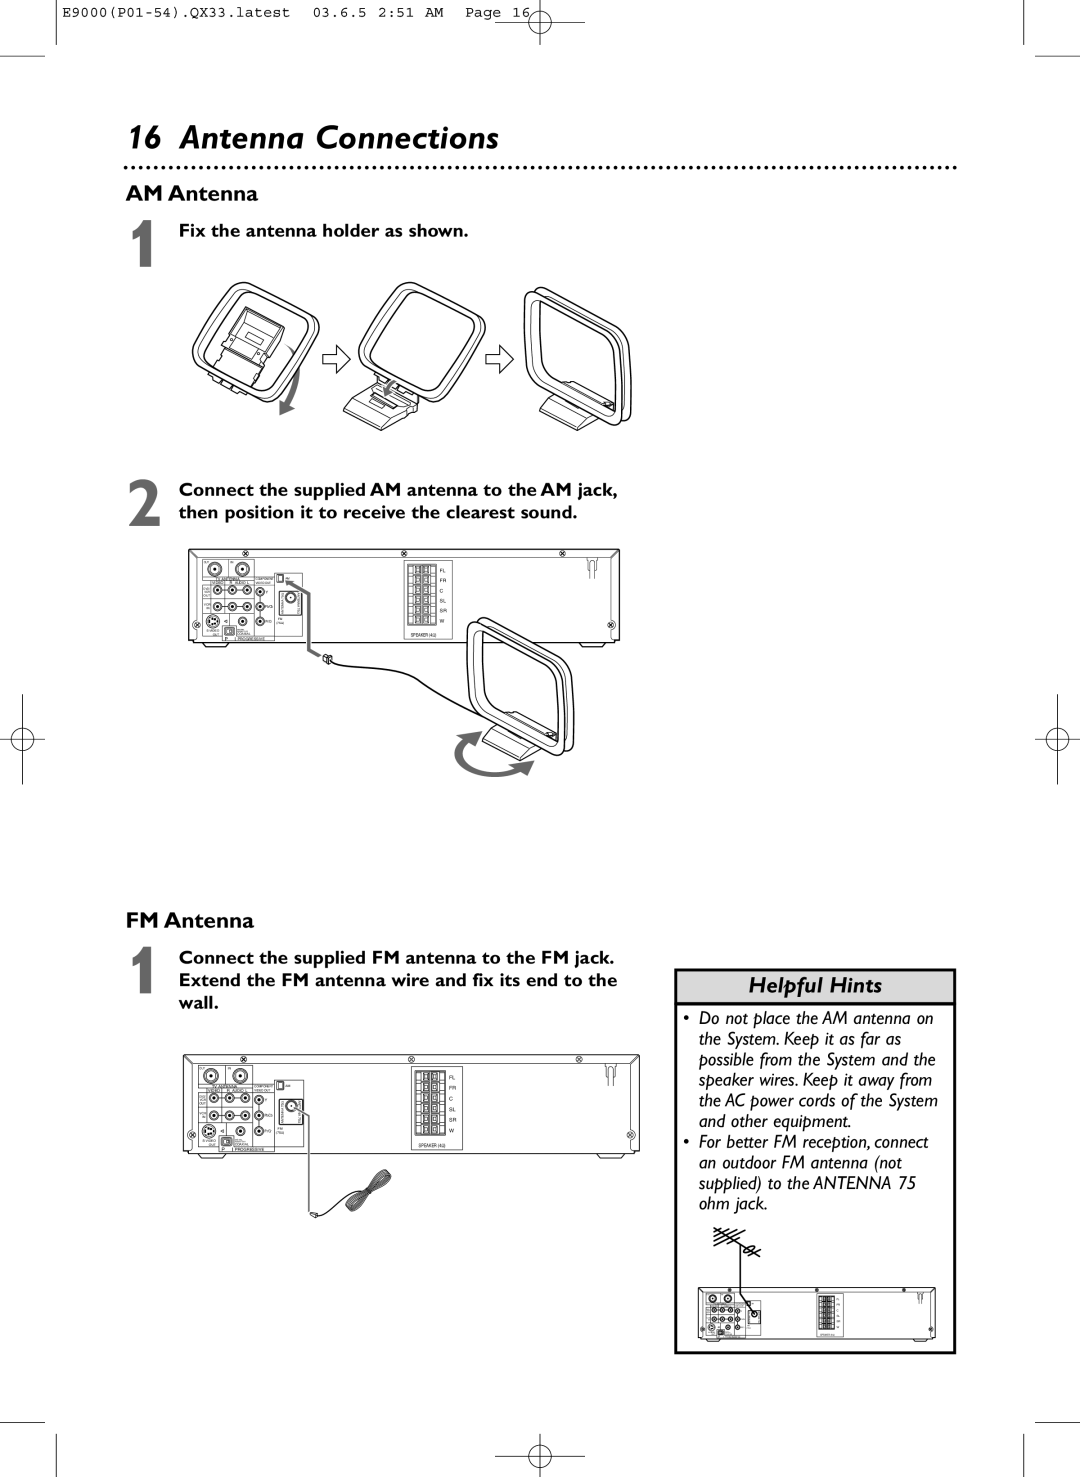 Magnavox MRD500VR owner manual Antenna Connections, AM Antenna, FM Antenna, Helpful Hints, Fix the antenna holder as shown 